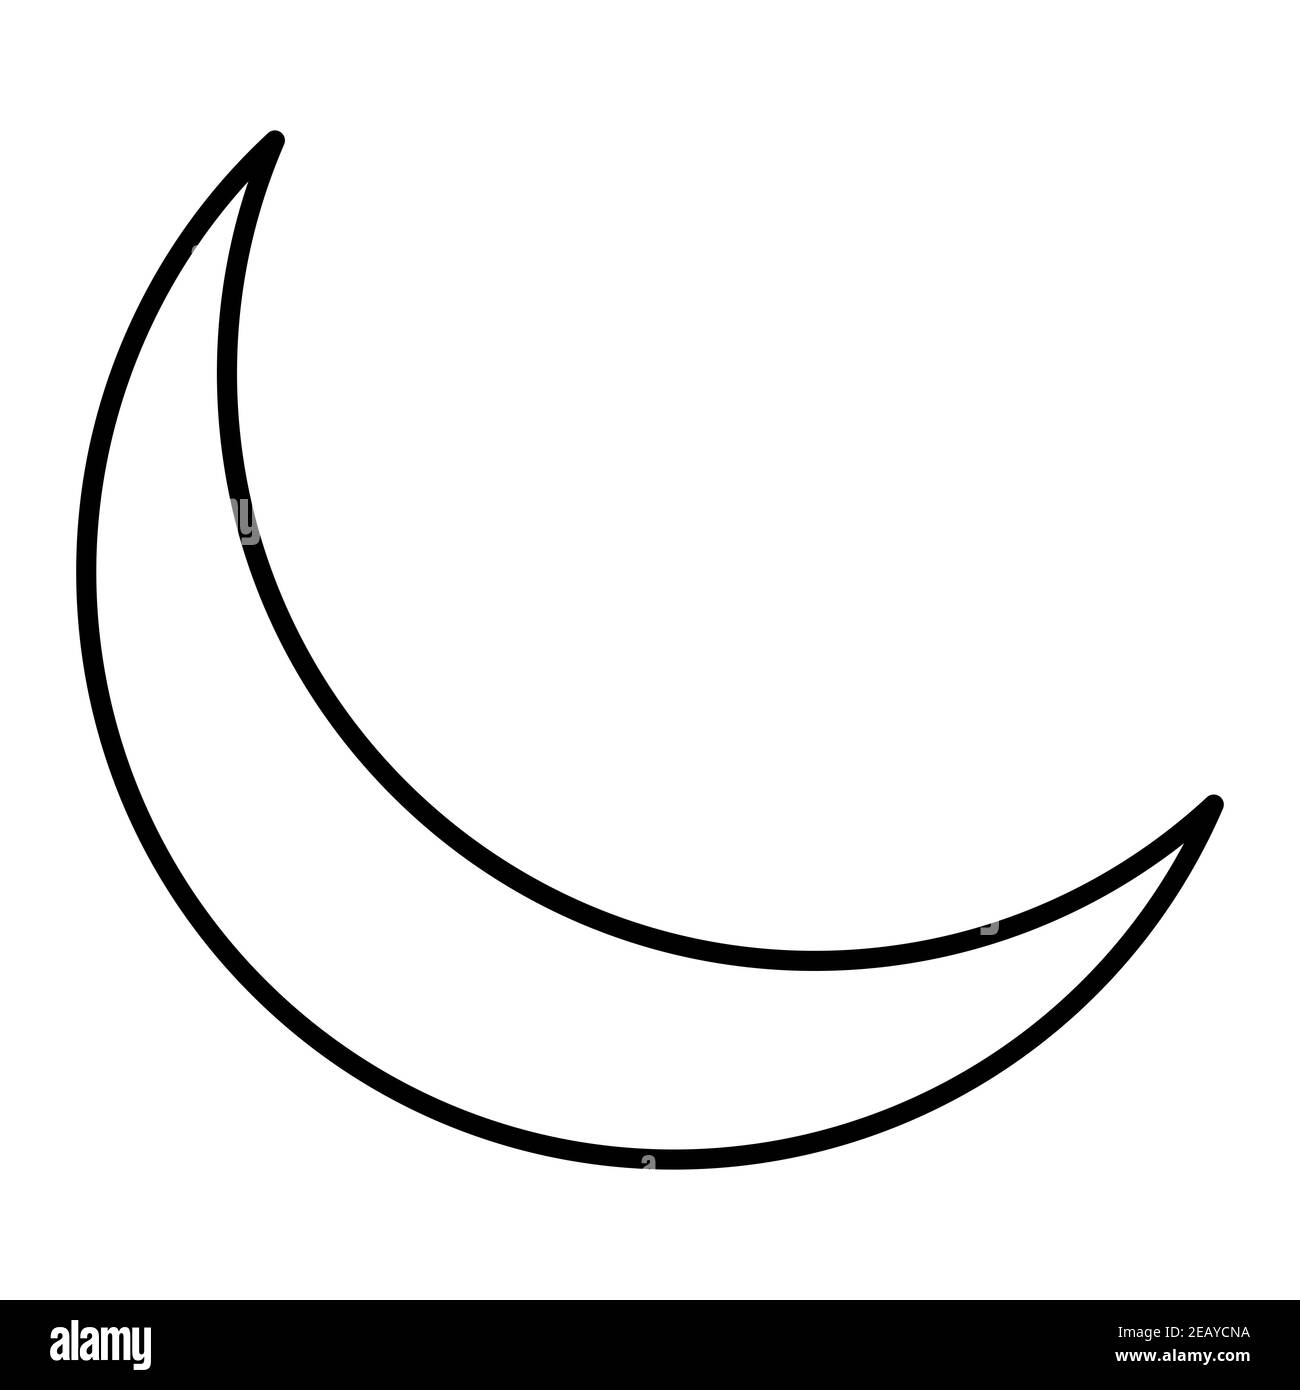 Outline illustration of a Crescent Moon icon Stock Photo